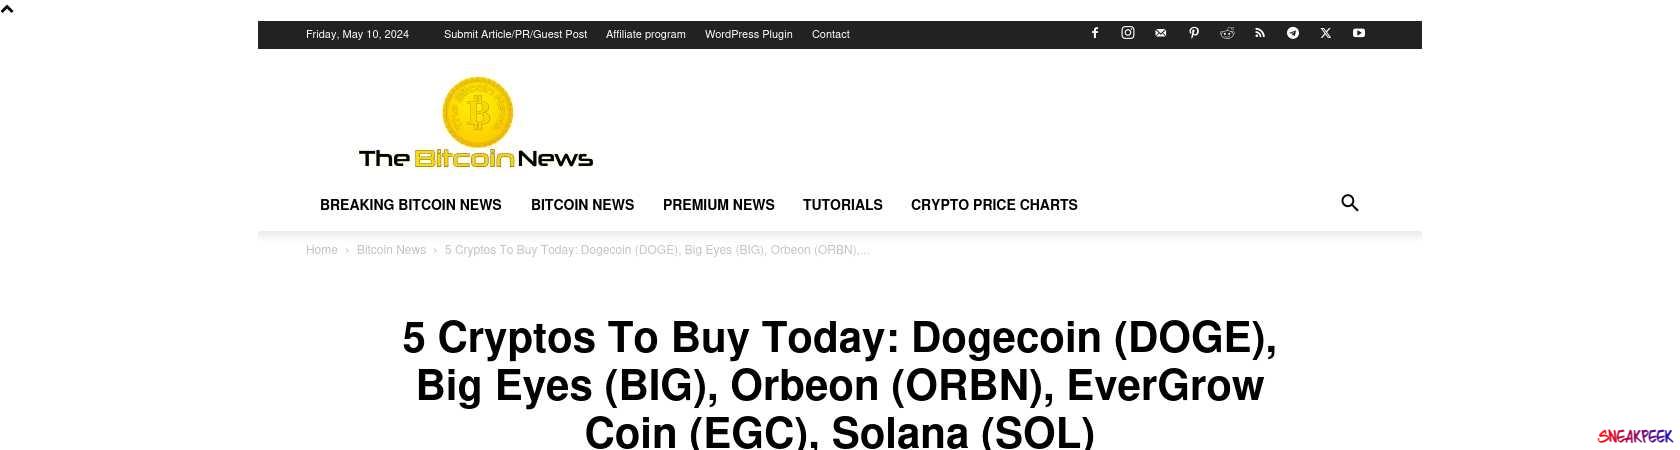 Read the full Article:  ⭲ 5 Cryptos To Buy Today: Dogecoin (DOGE), Big Eyes (BIG), Orbeon (ORBN), EverGrow Coin (EGC), Solana (SOL)